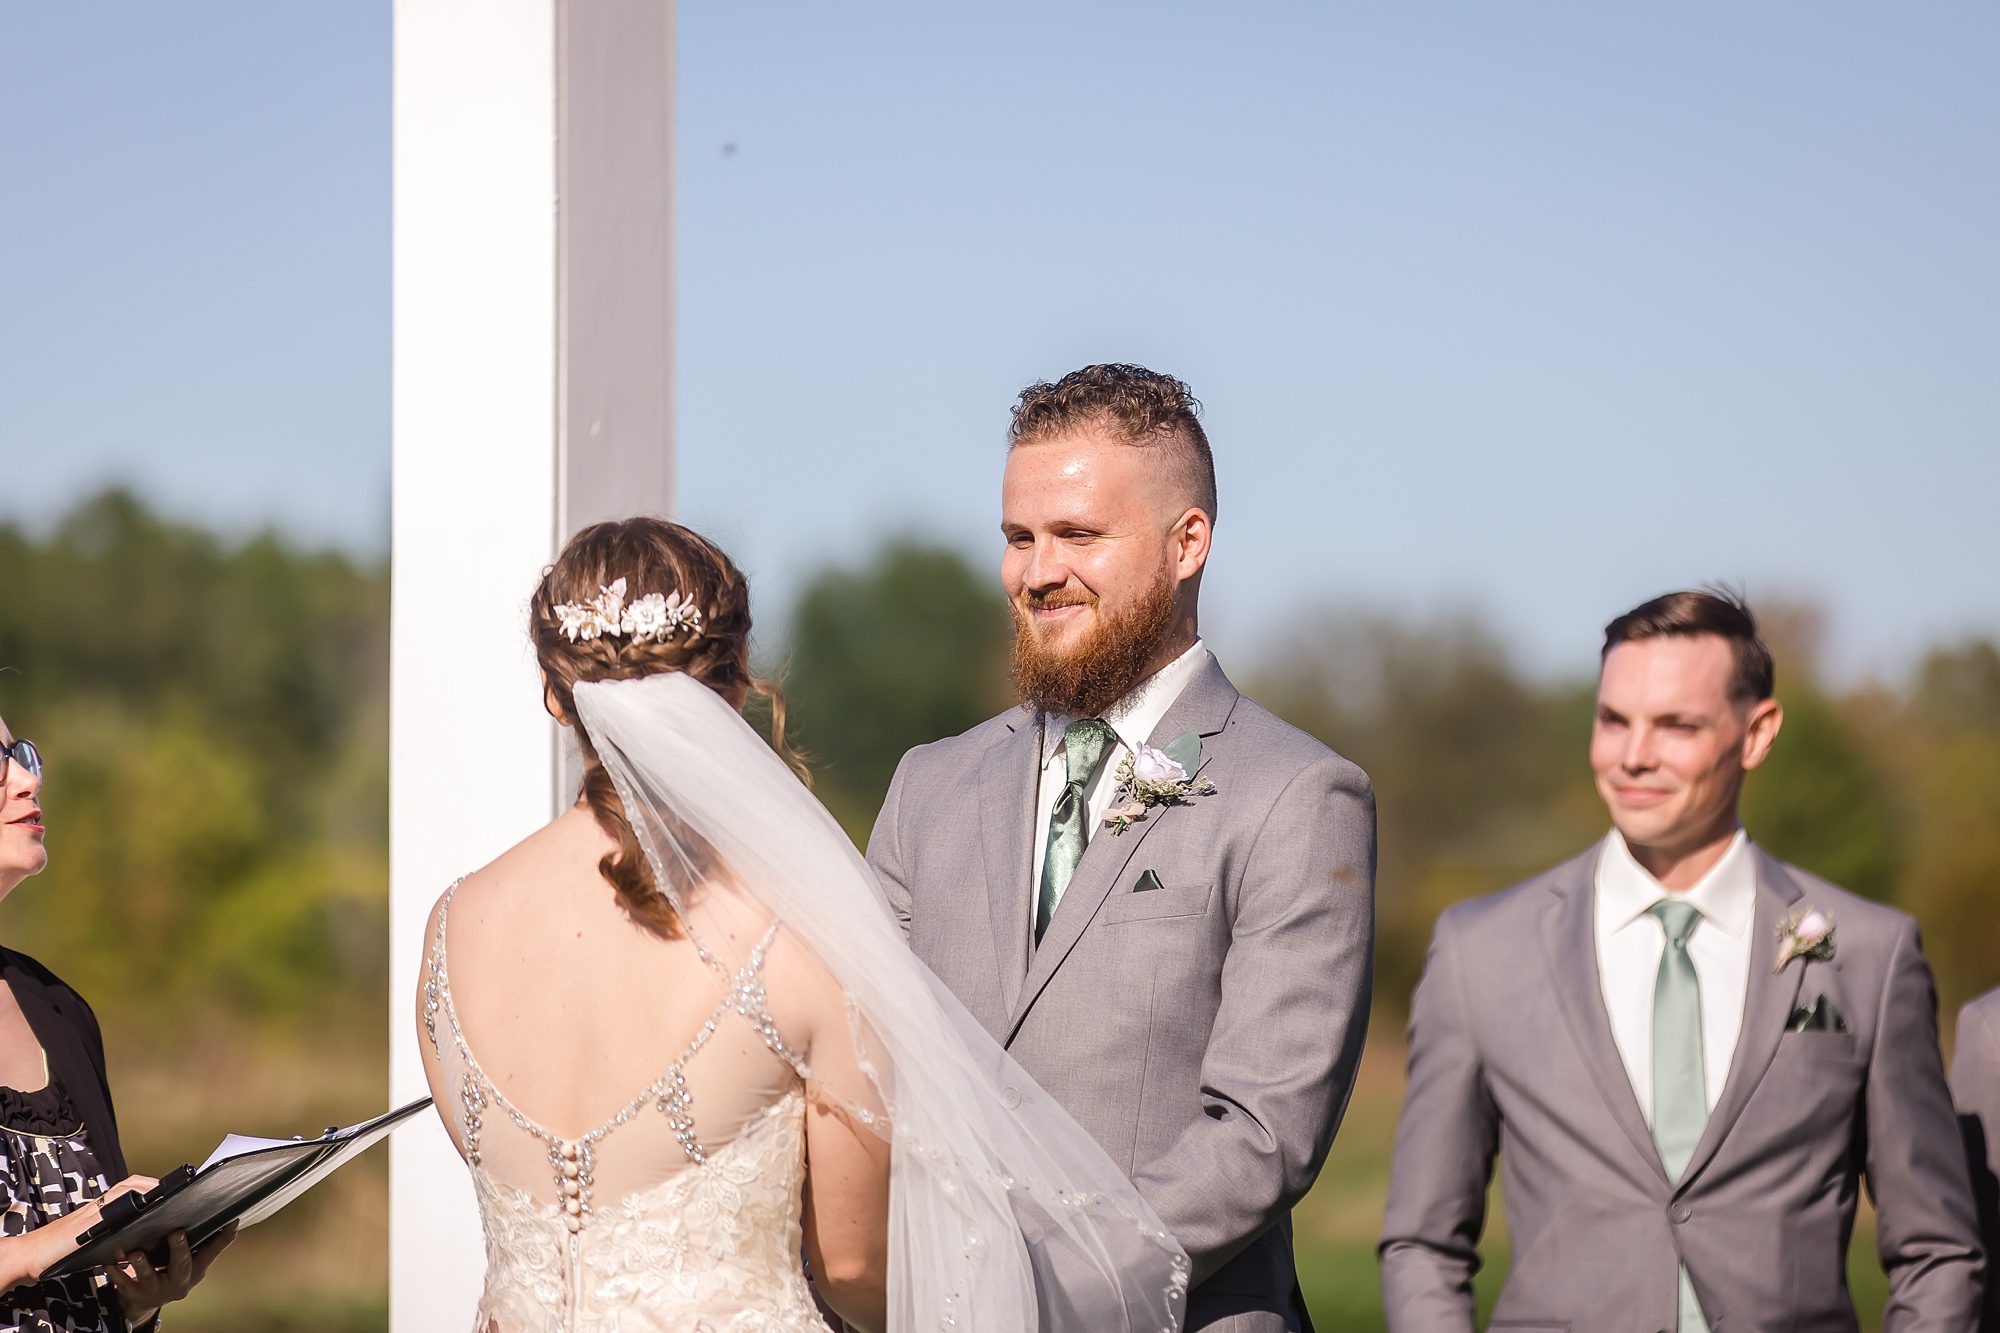 sunny outdoor wedding ceremony in the country